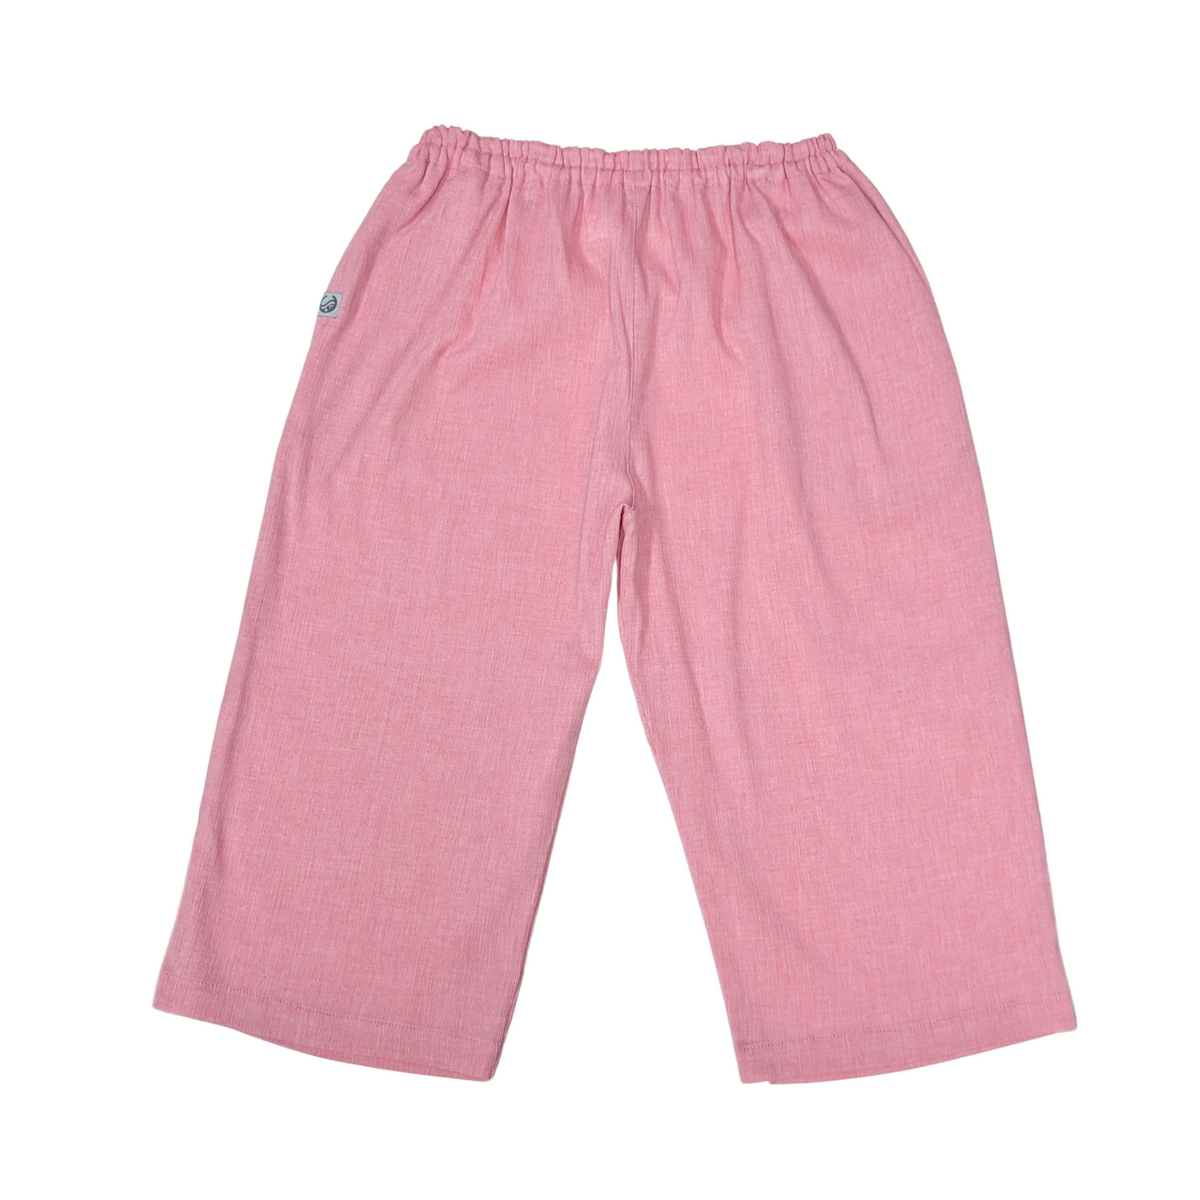 Cool, Stretchy, Comfy Lounge Pants | Unisex | Solid Color | Pink, Navy, Gray